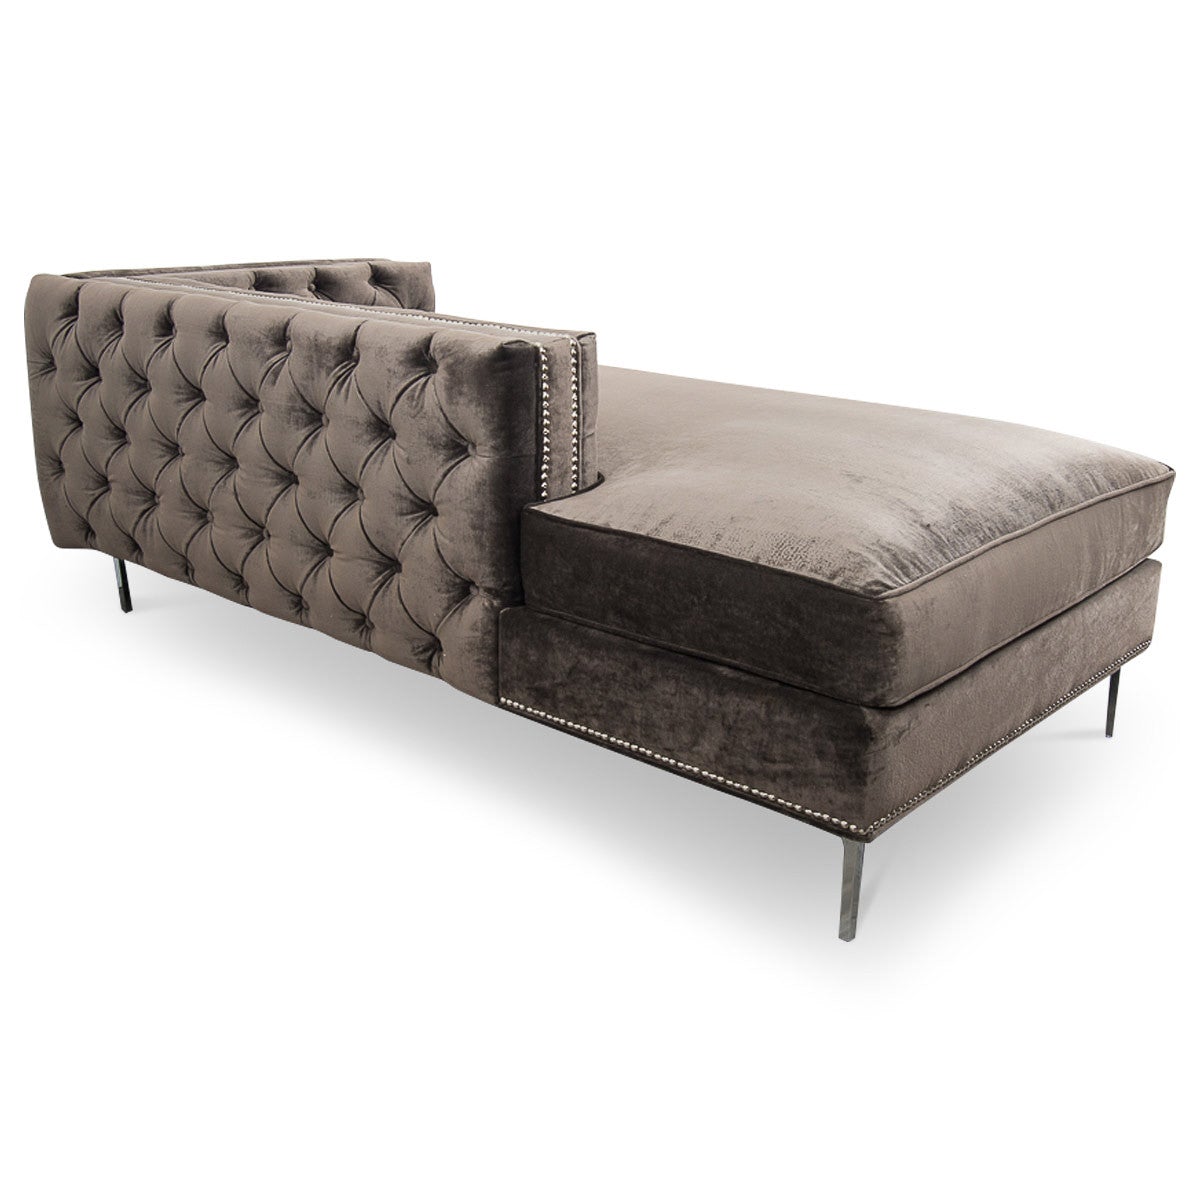 Hollywood Inside-Out Chaise in Charcoal Velvet - ModShop1.com